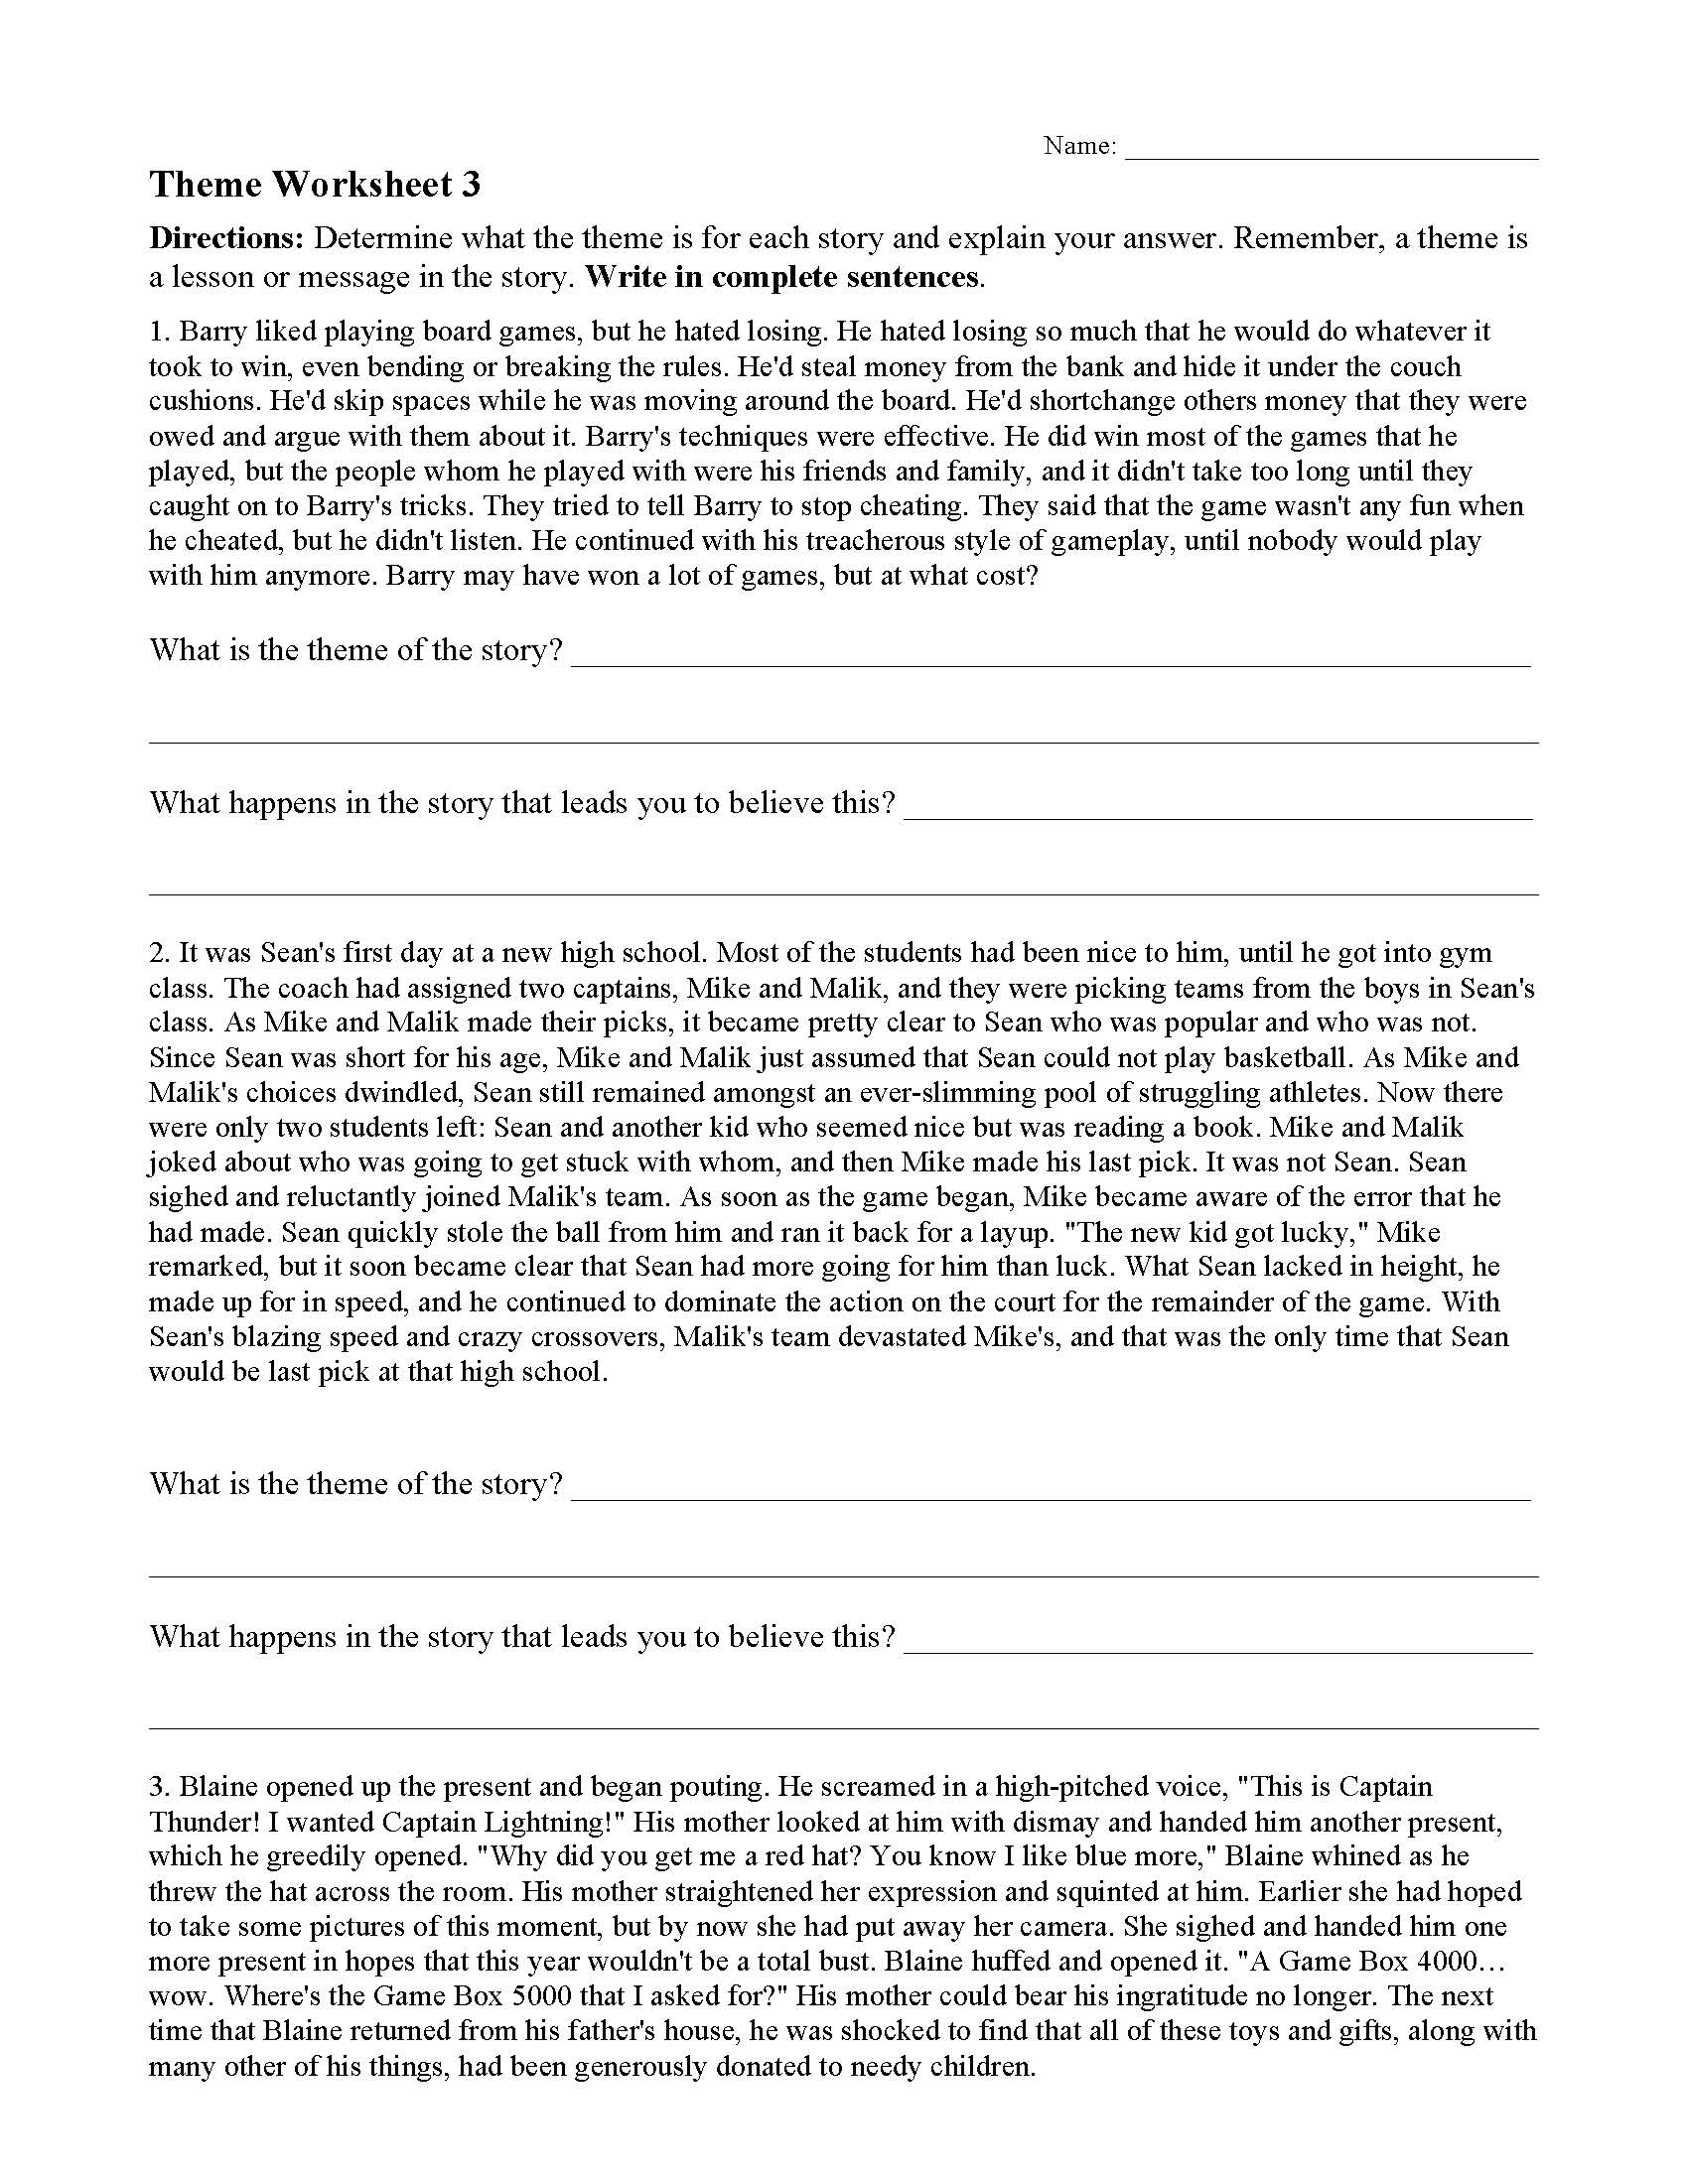 identifying-theme-worksheet-answers-differentiate-between-themes-and